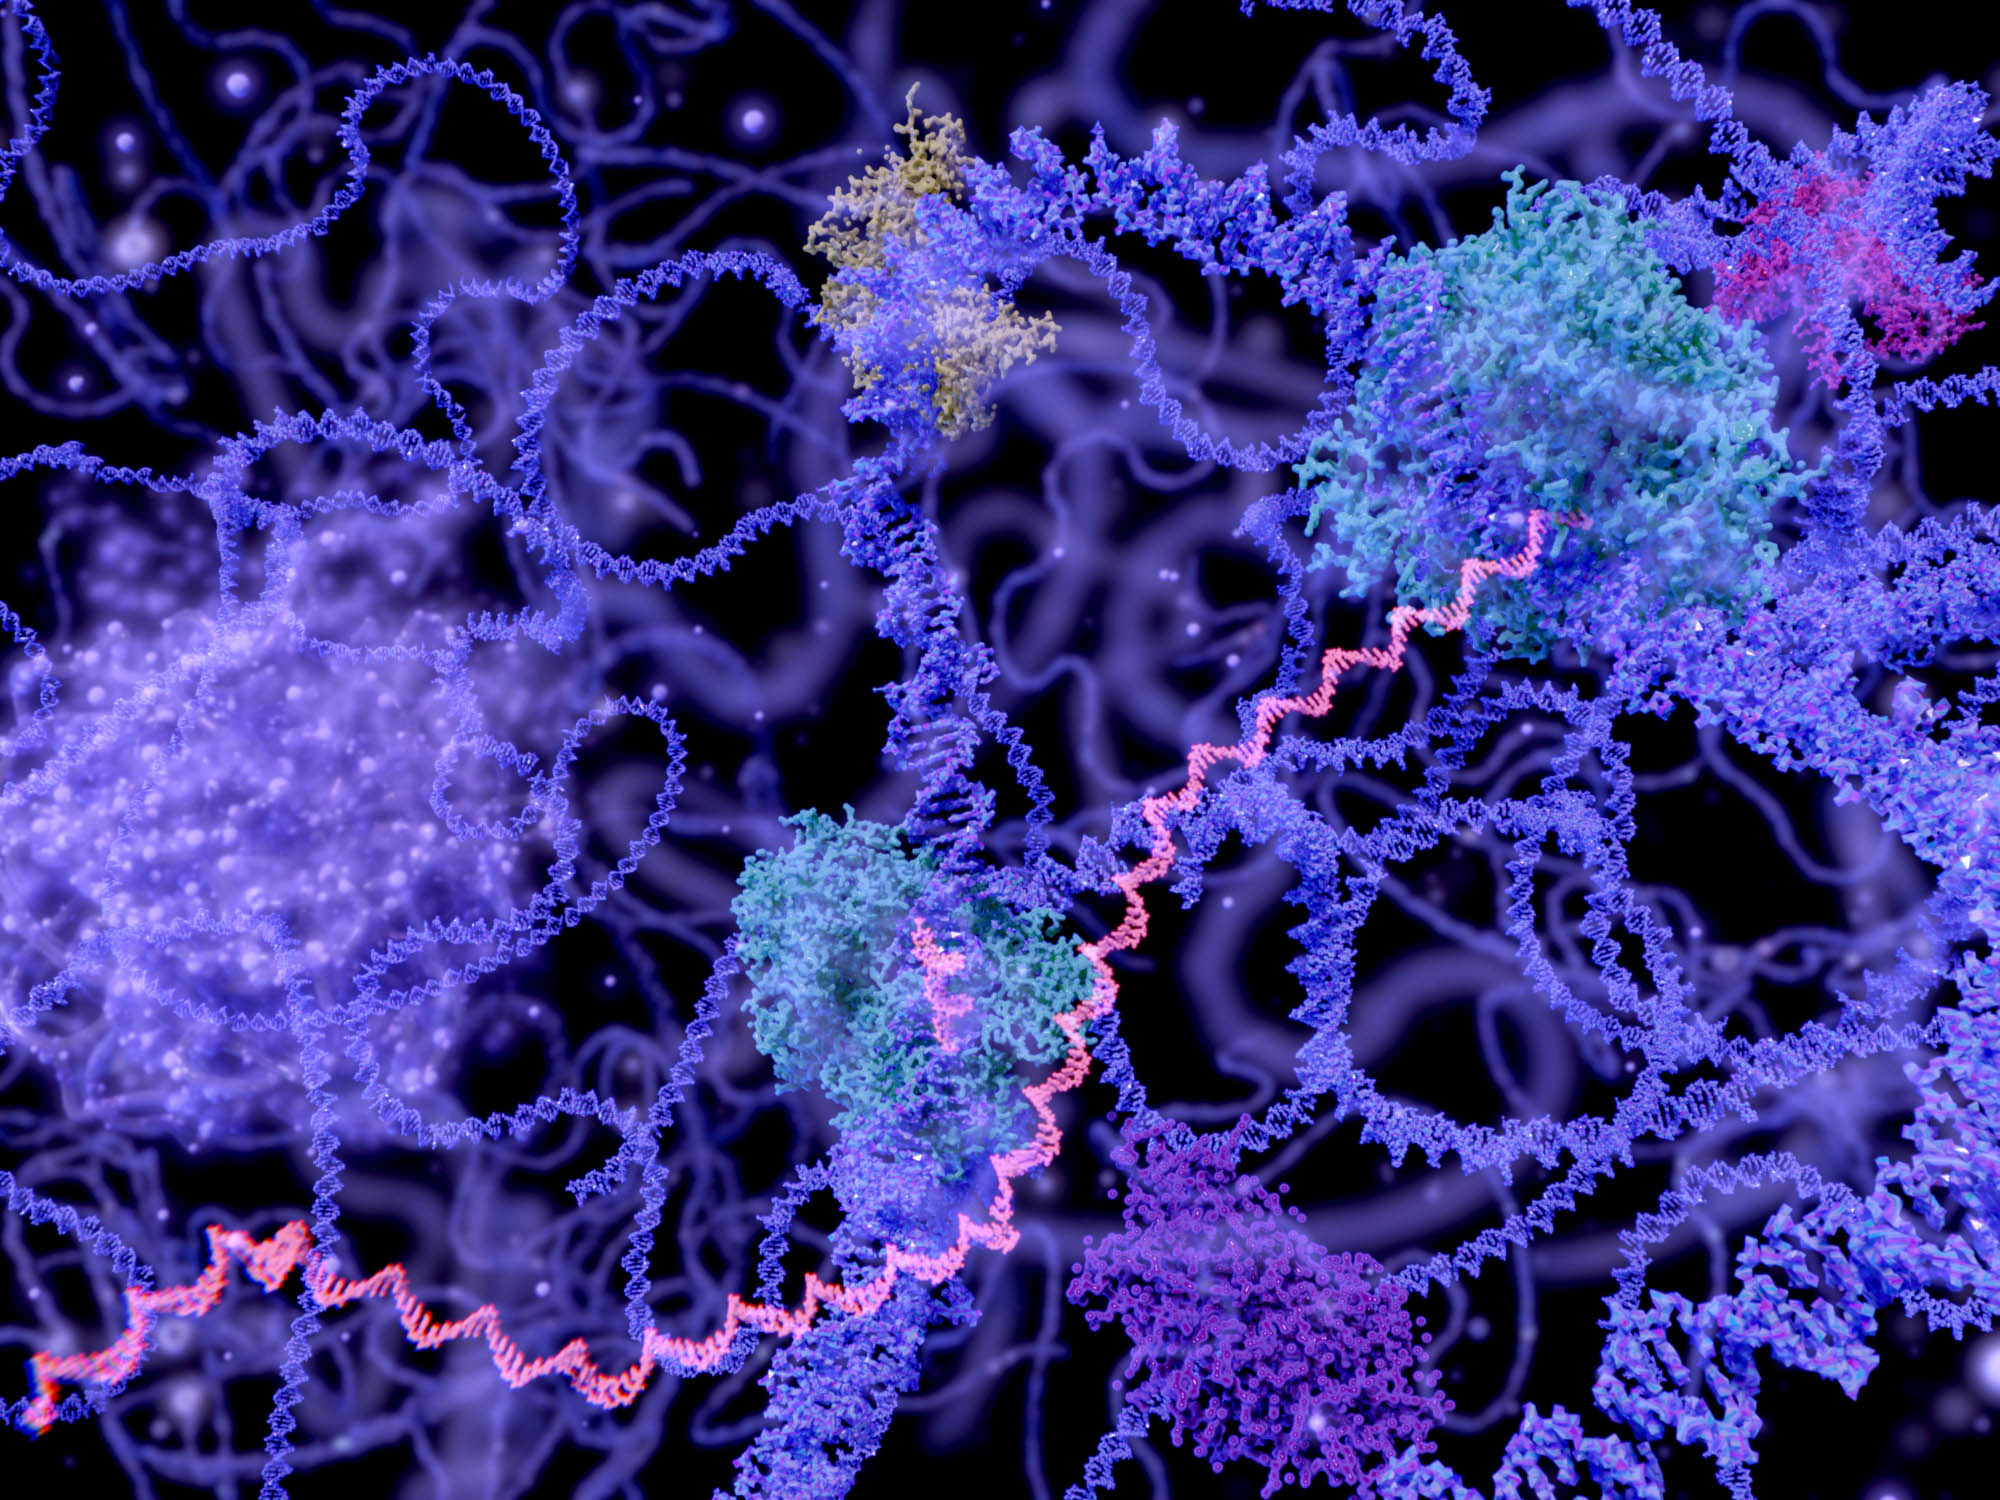 DNA mRNA Getty Images